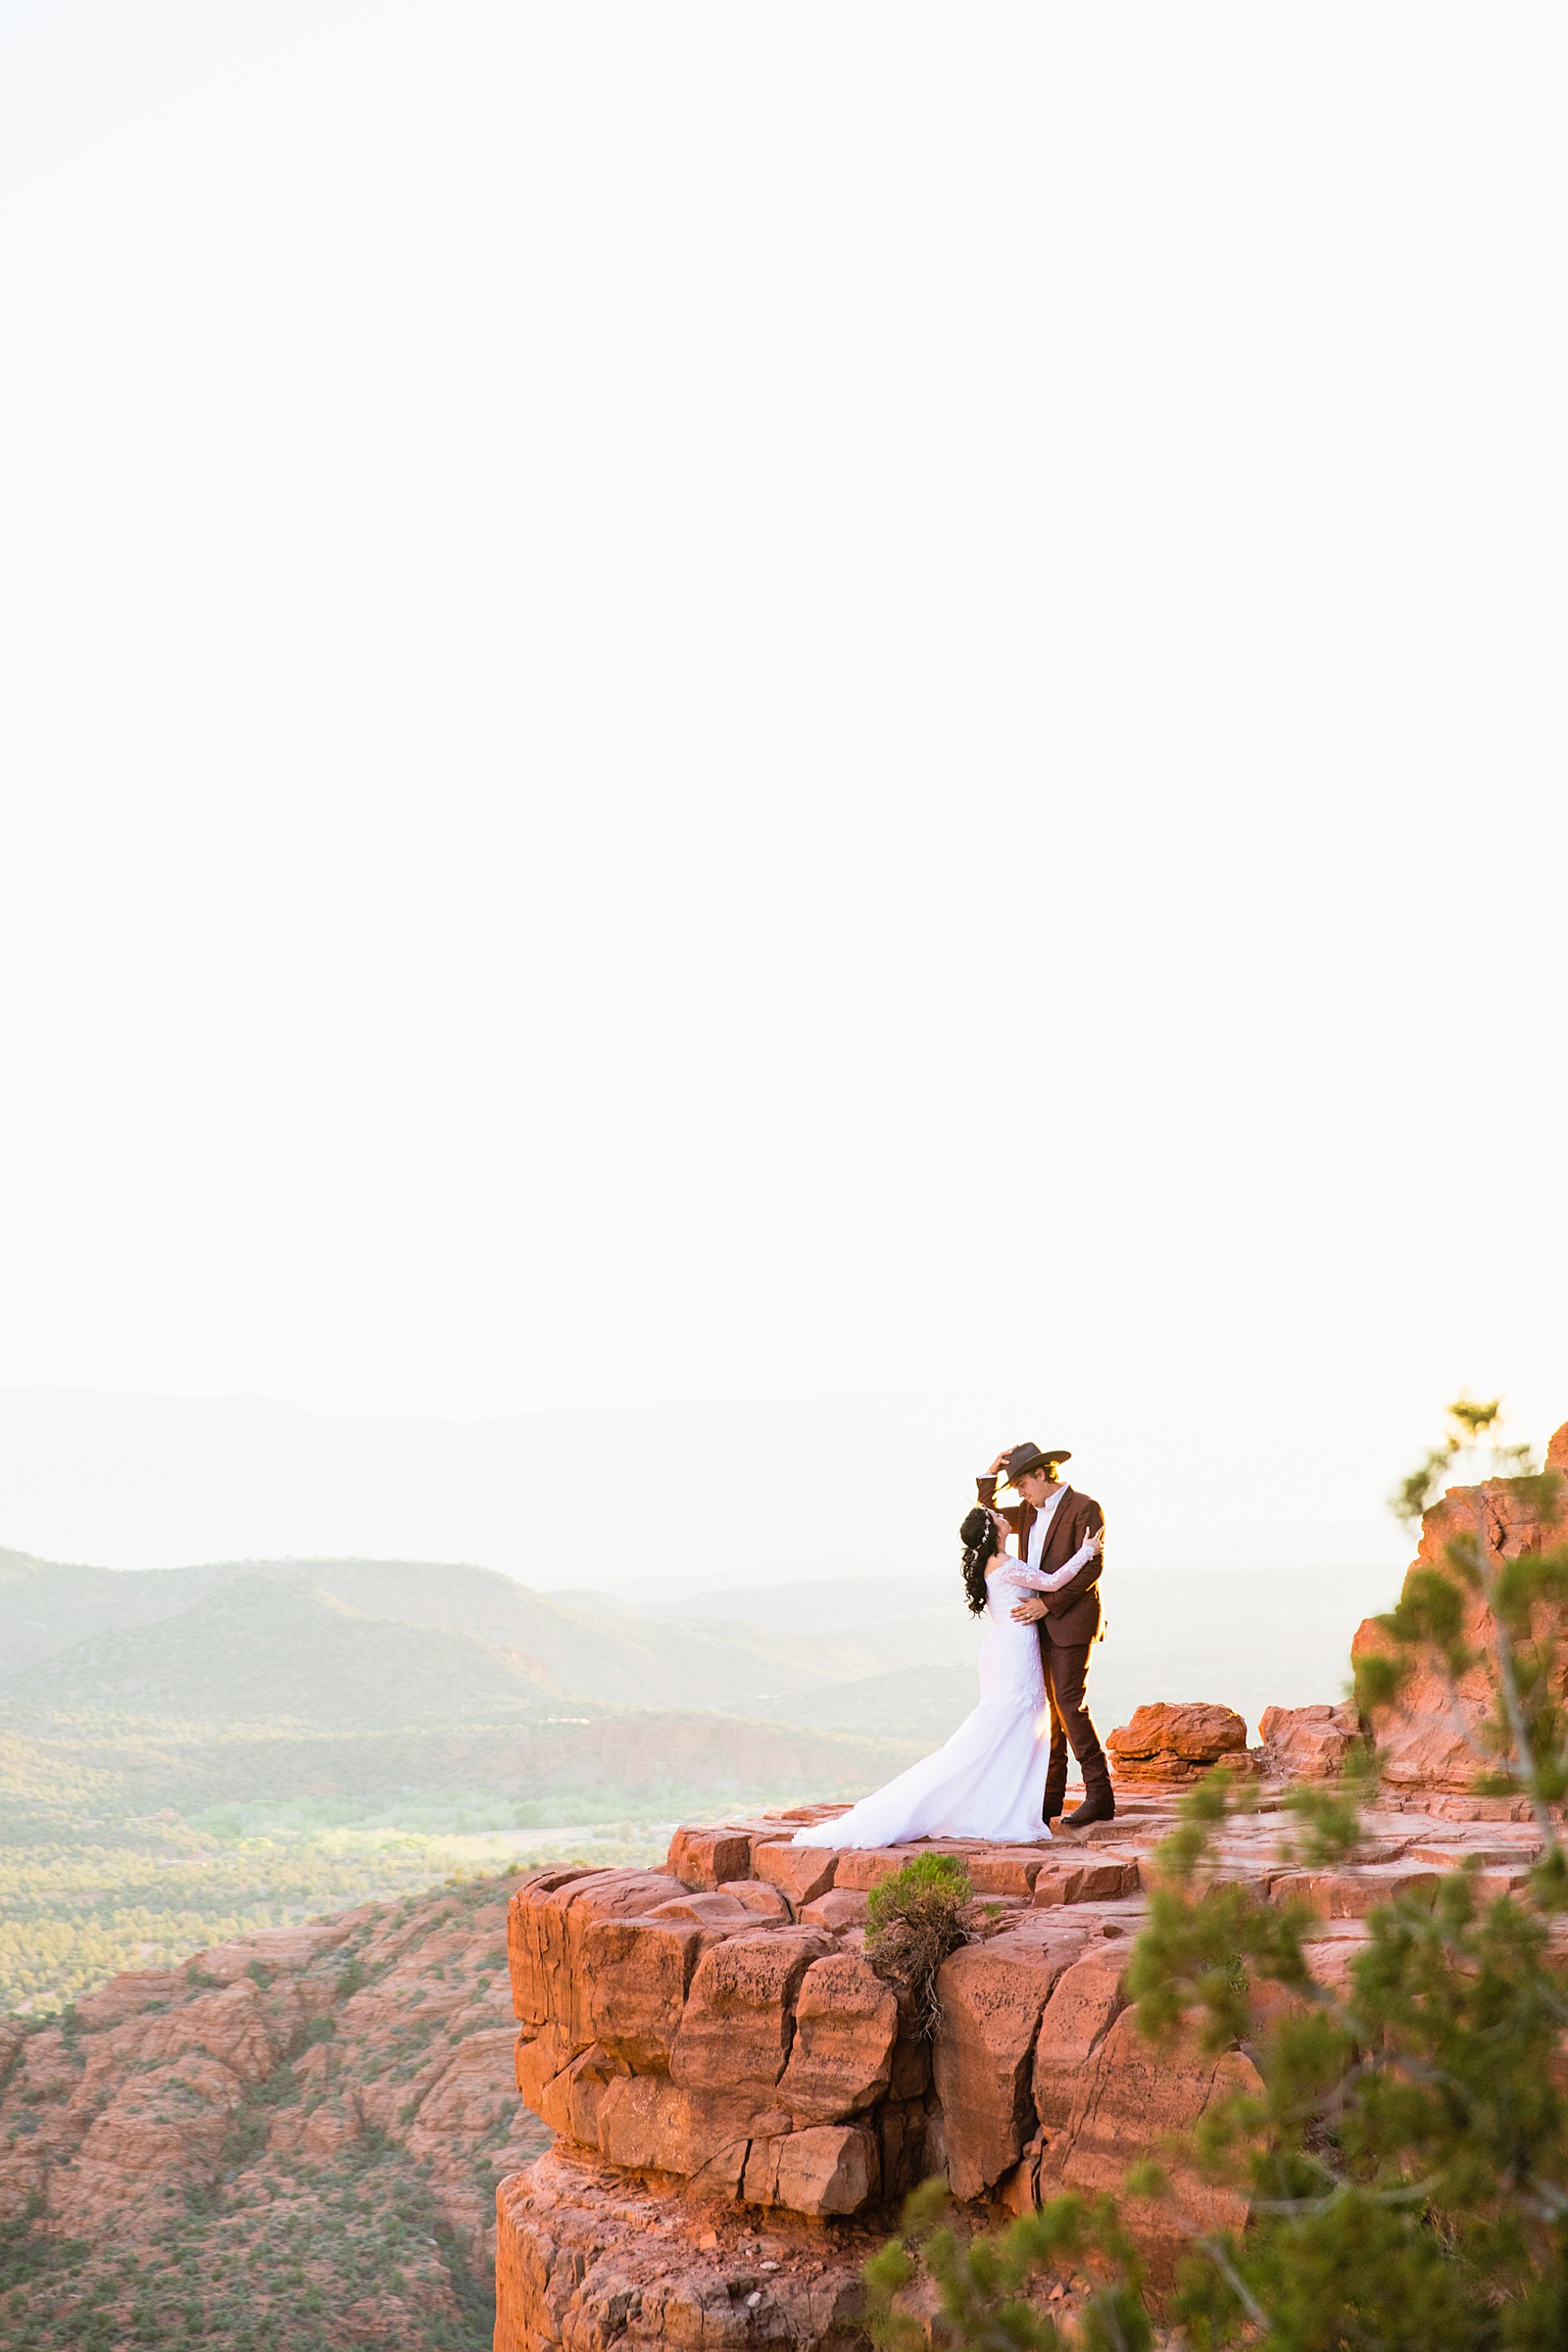 Bride and Groom share an intimate moment during their Cathedral Rock elopement by Sedona elopement photographer PMA Photography.